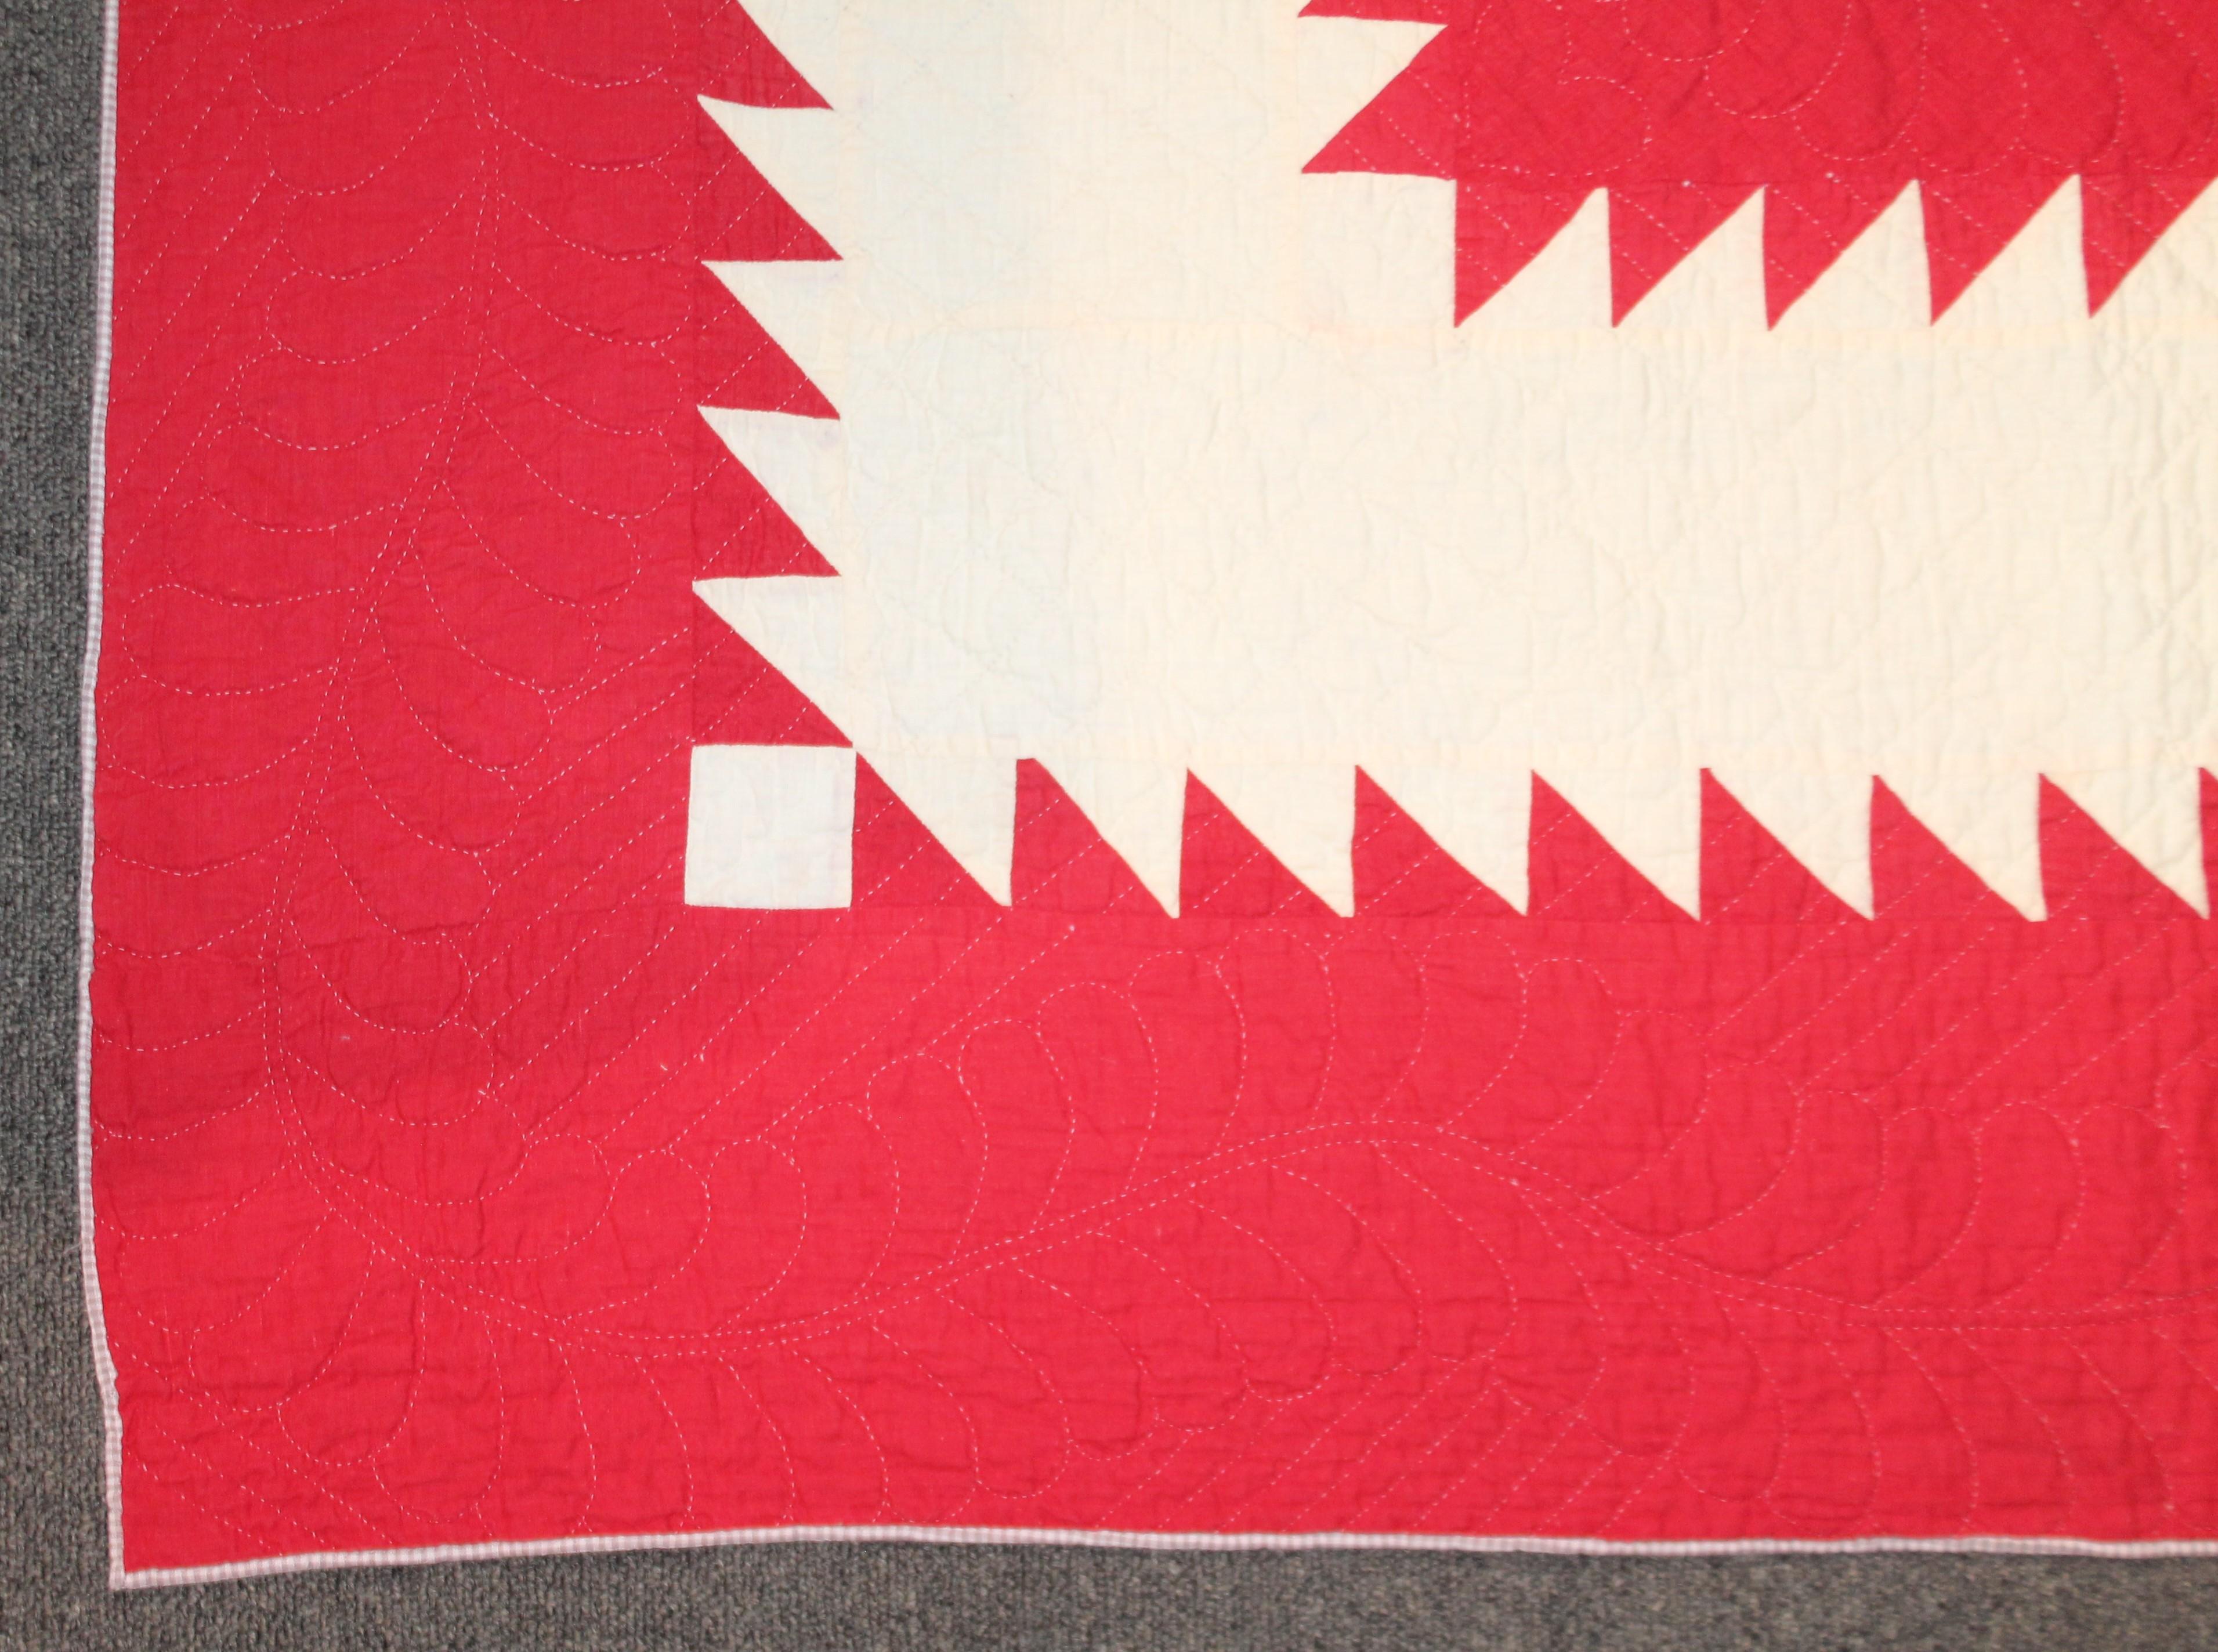 American Antique Quilt Red and White Saw Tooth Diamond